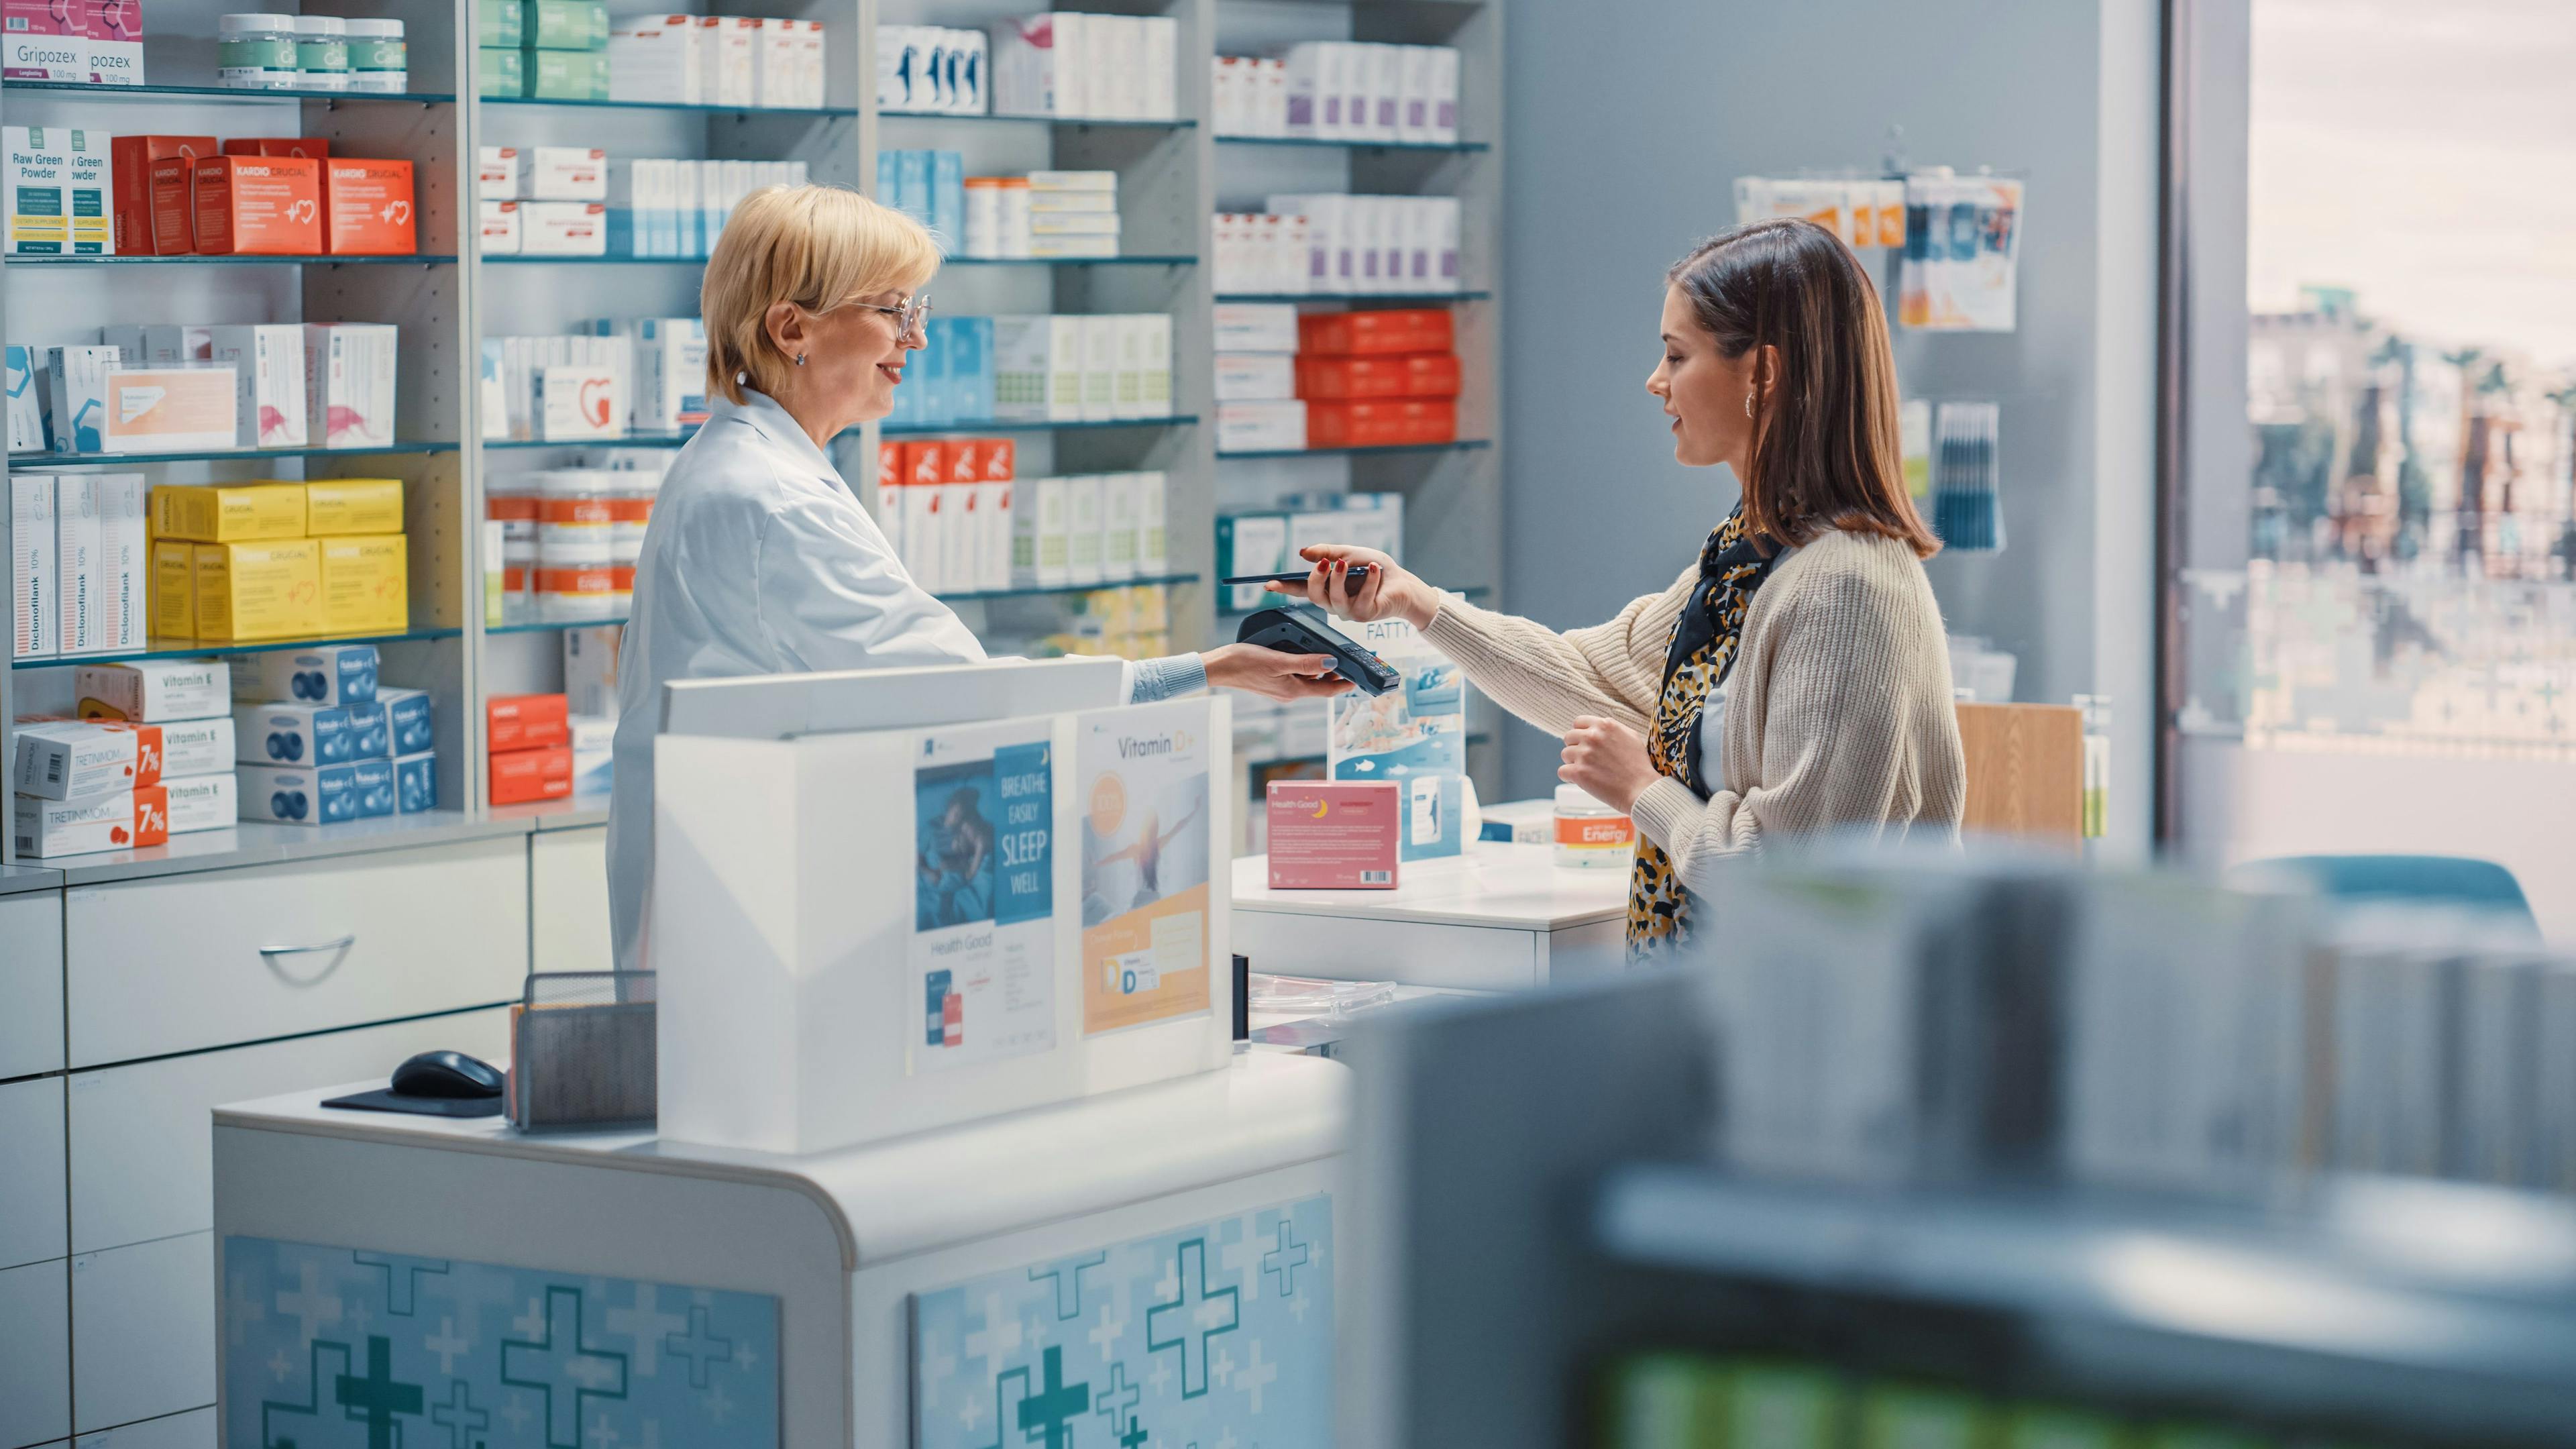 Pharmacy Drugstore Checkout Cashier Counter | Image Credit: Gorodenkoff - stock.adobe.com